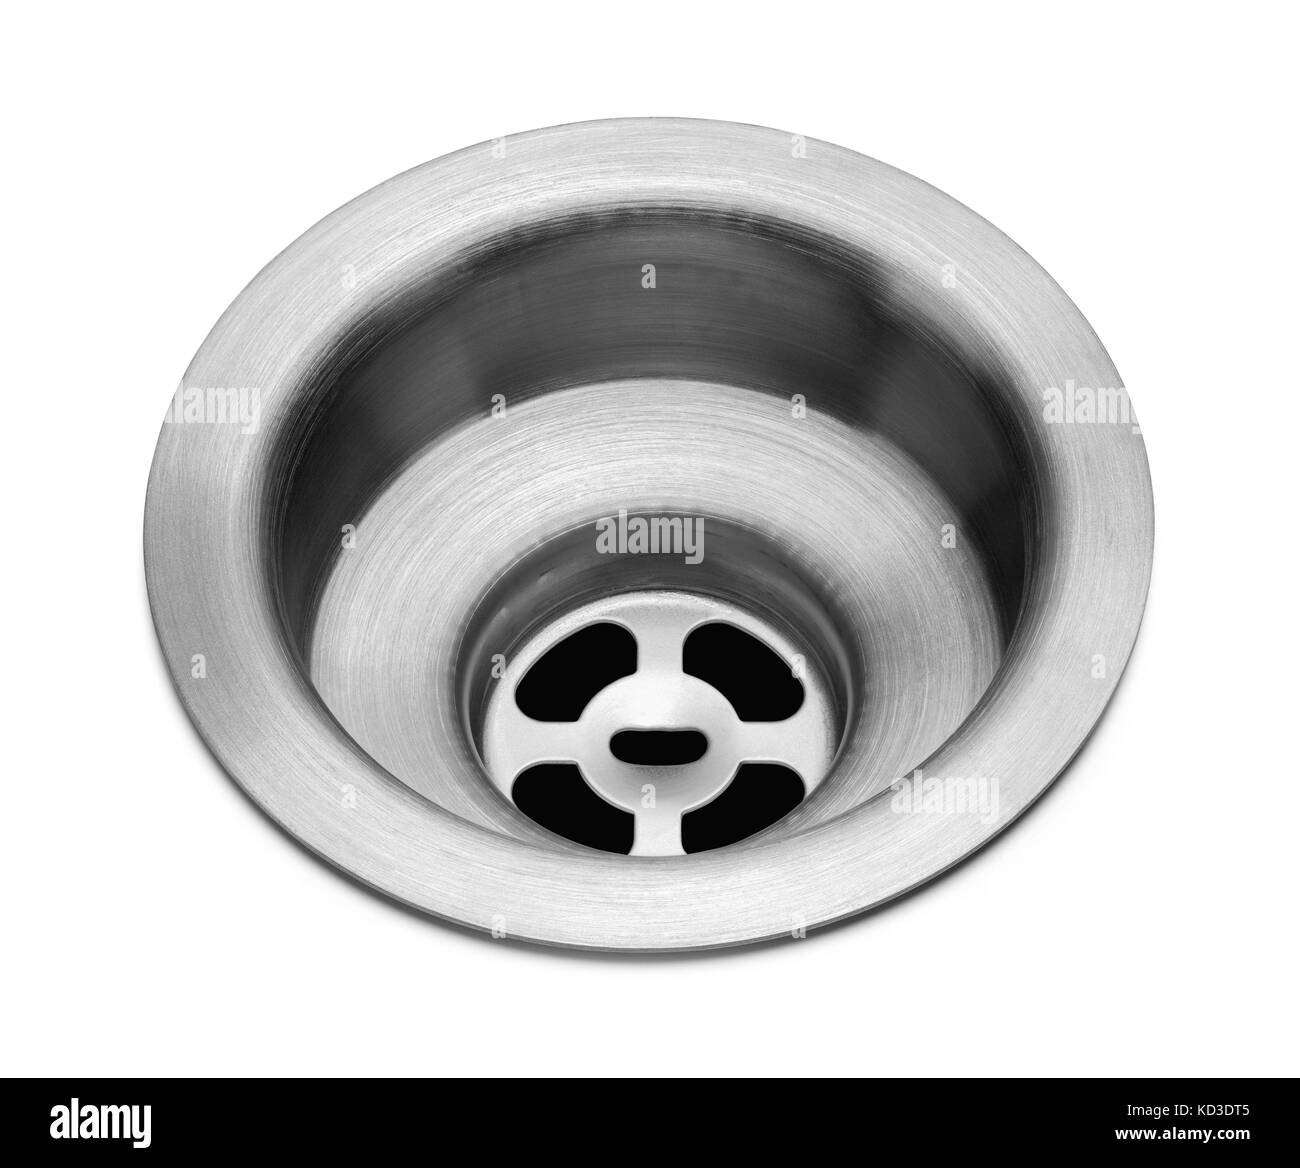 Metal Kitchen Sink Drain Isolated on White Background. Stock Photo